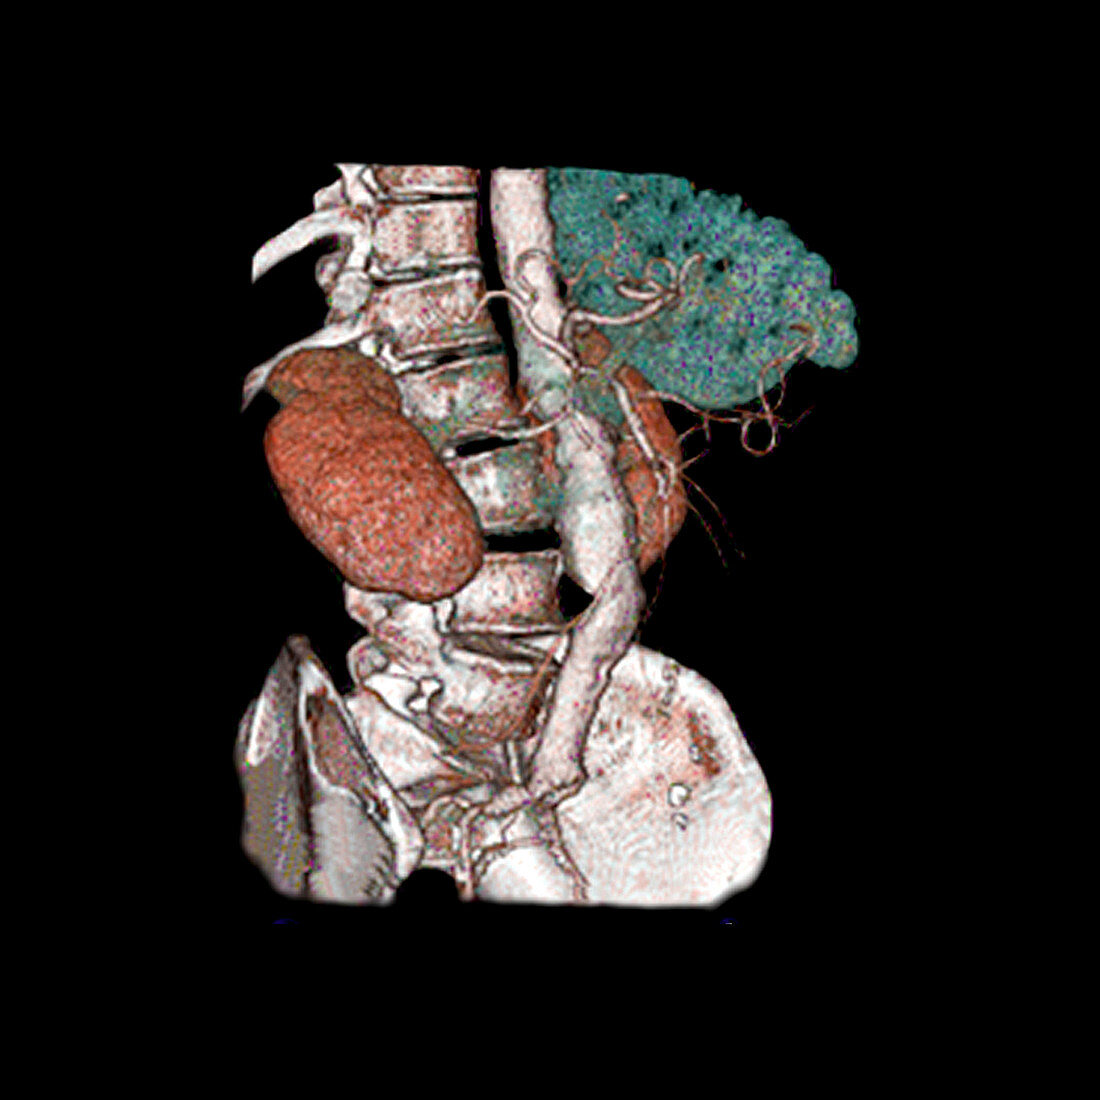 Abdominal aortic aneurysm and kidney